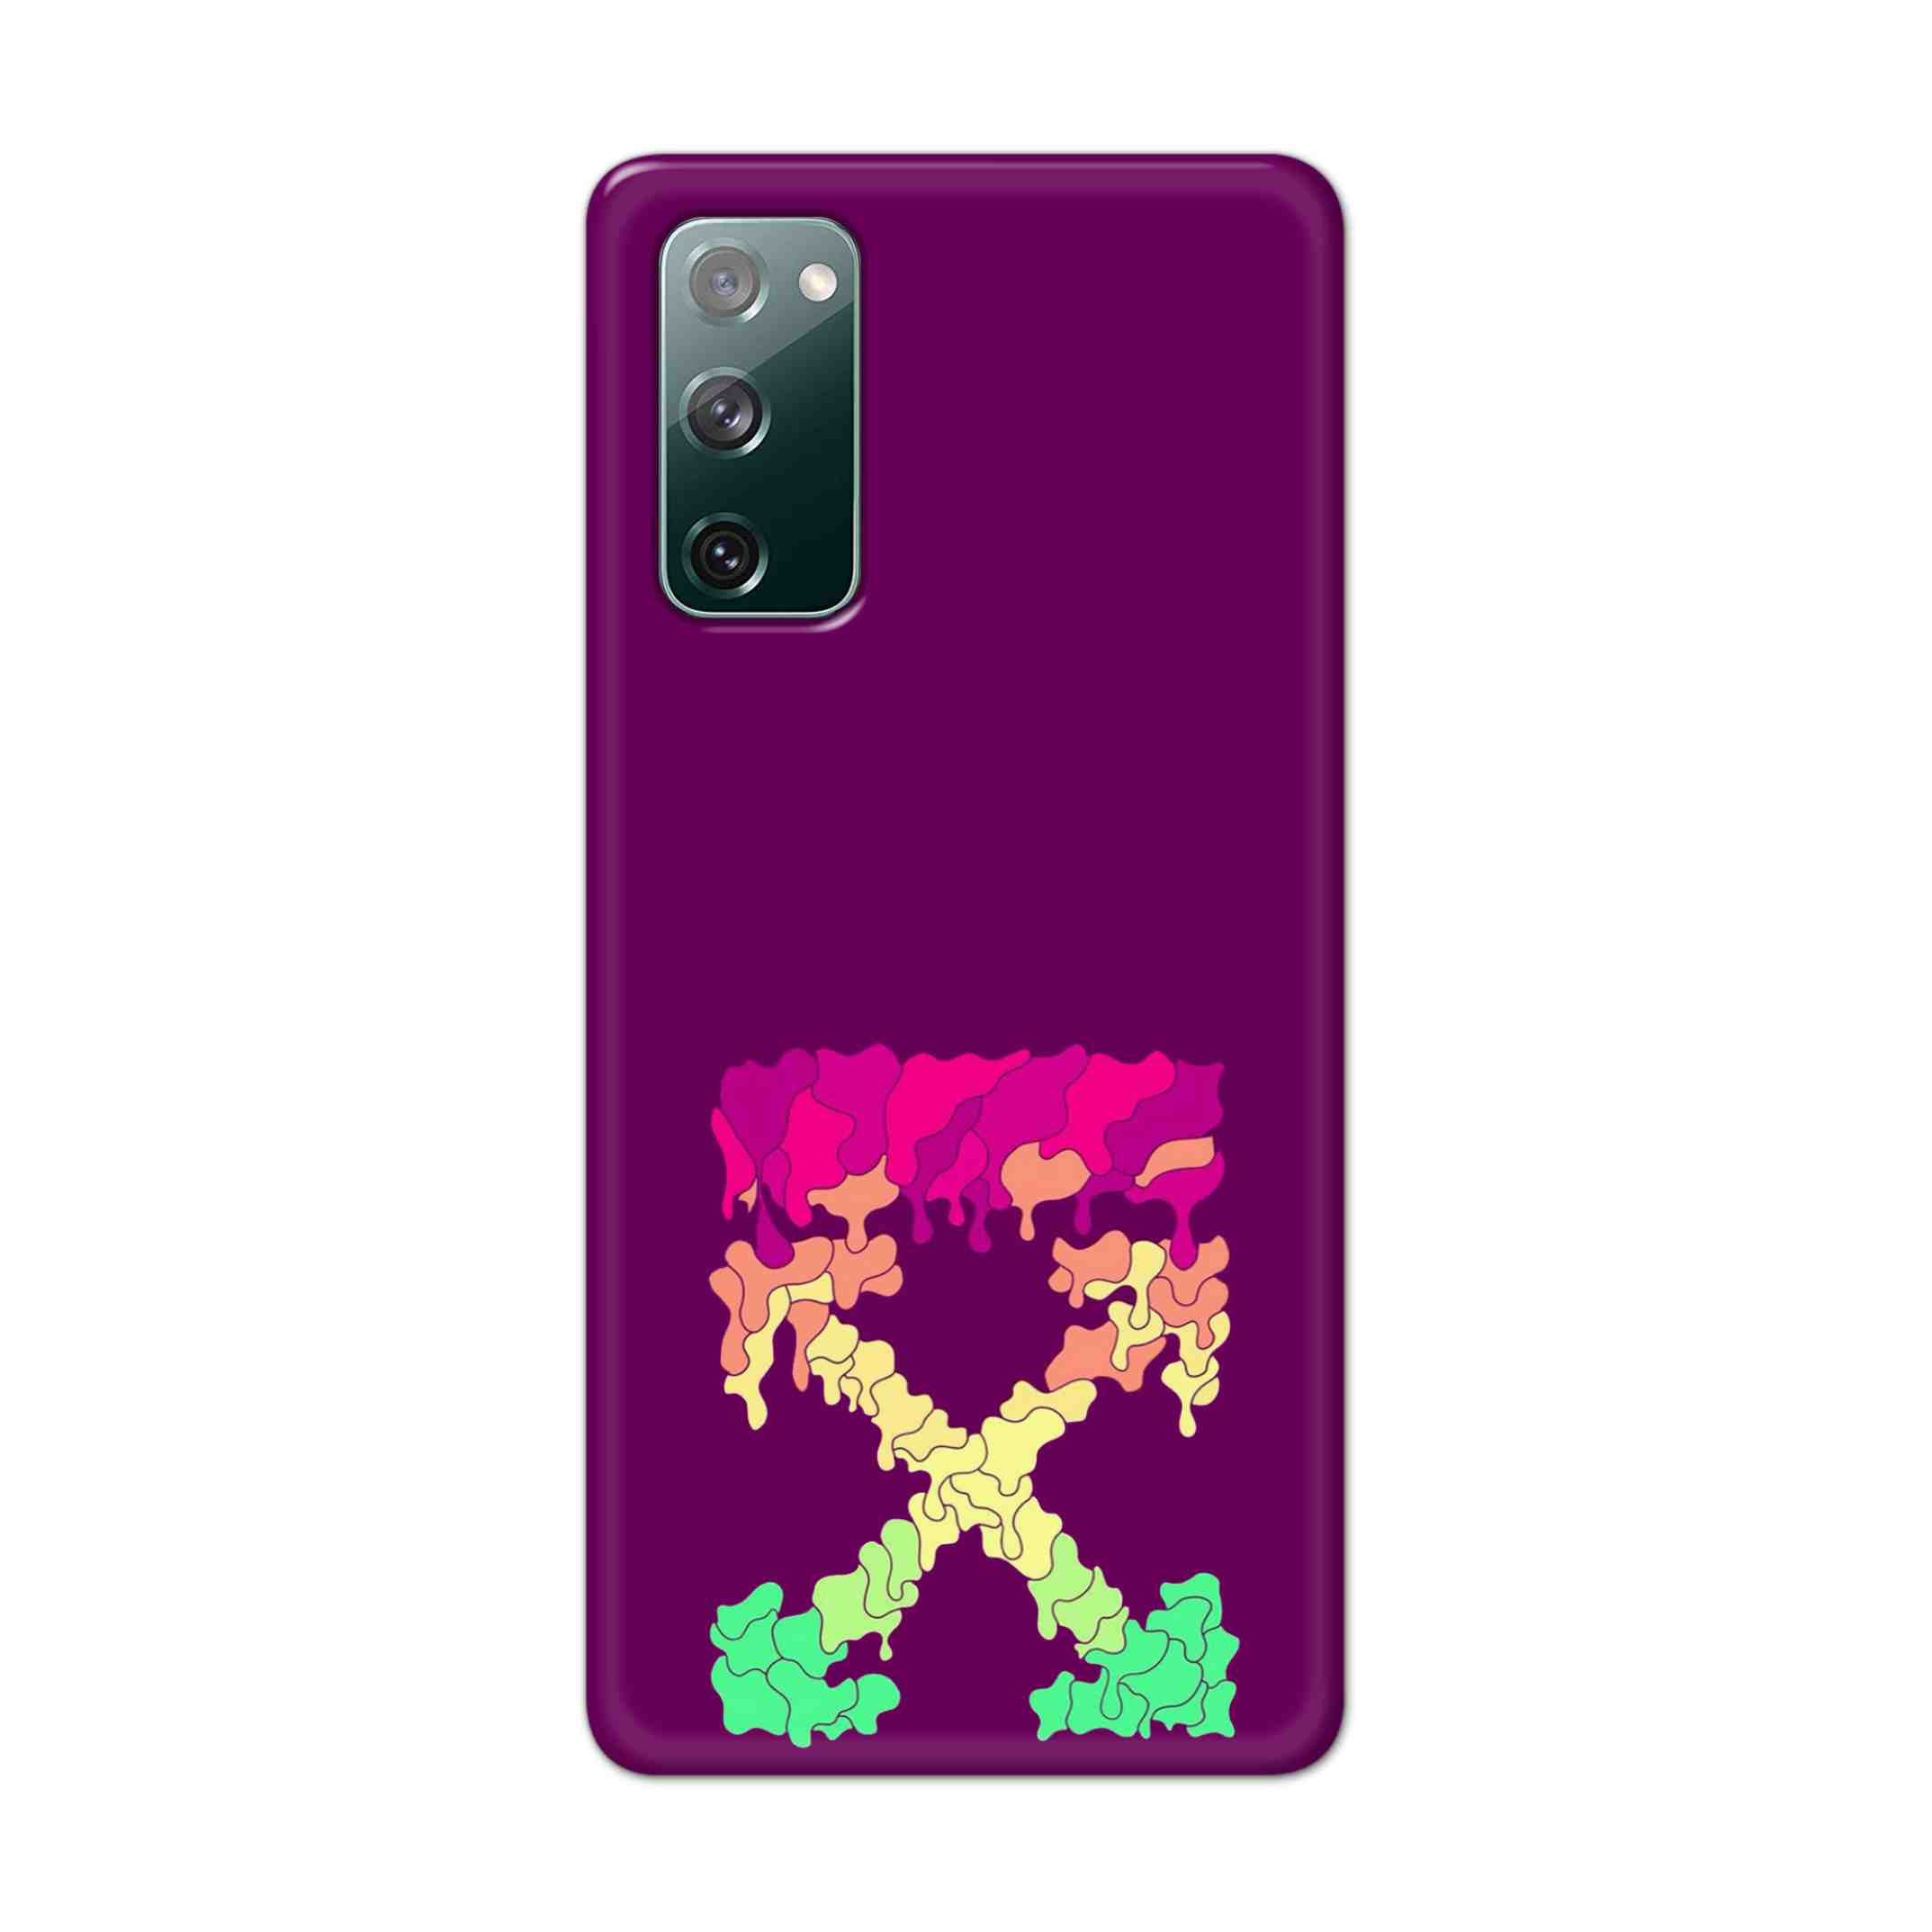 Buy X.O Hard Back Mobile Phone Case Cover For Samsung Galaxy S20 FE Online